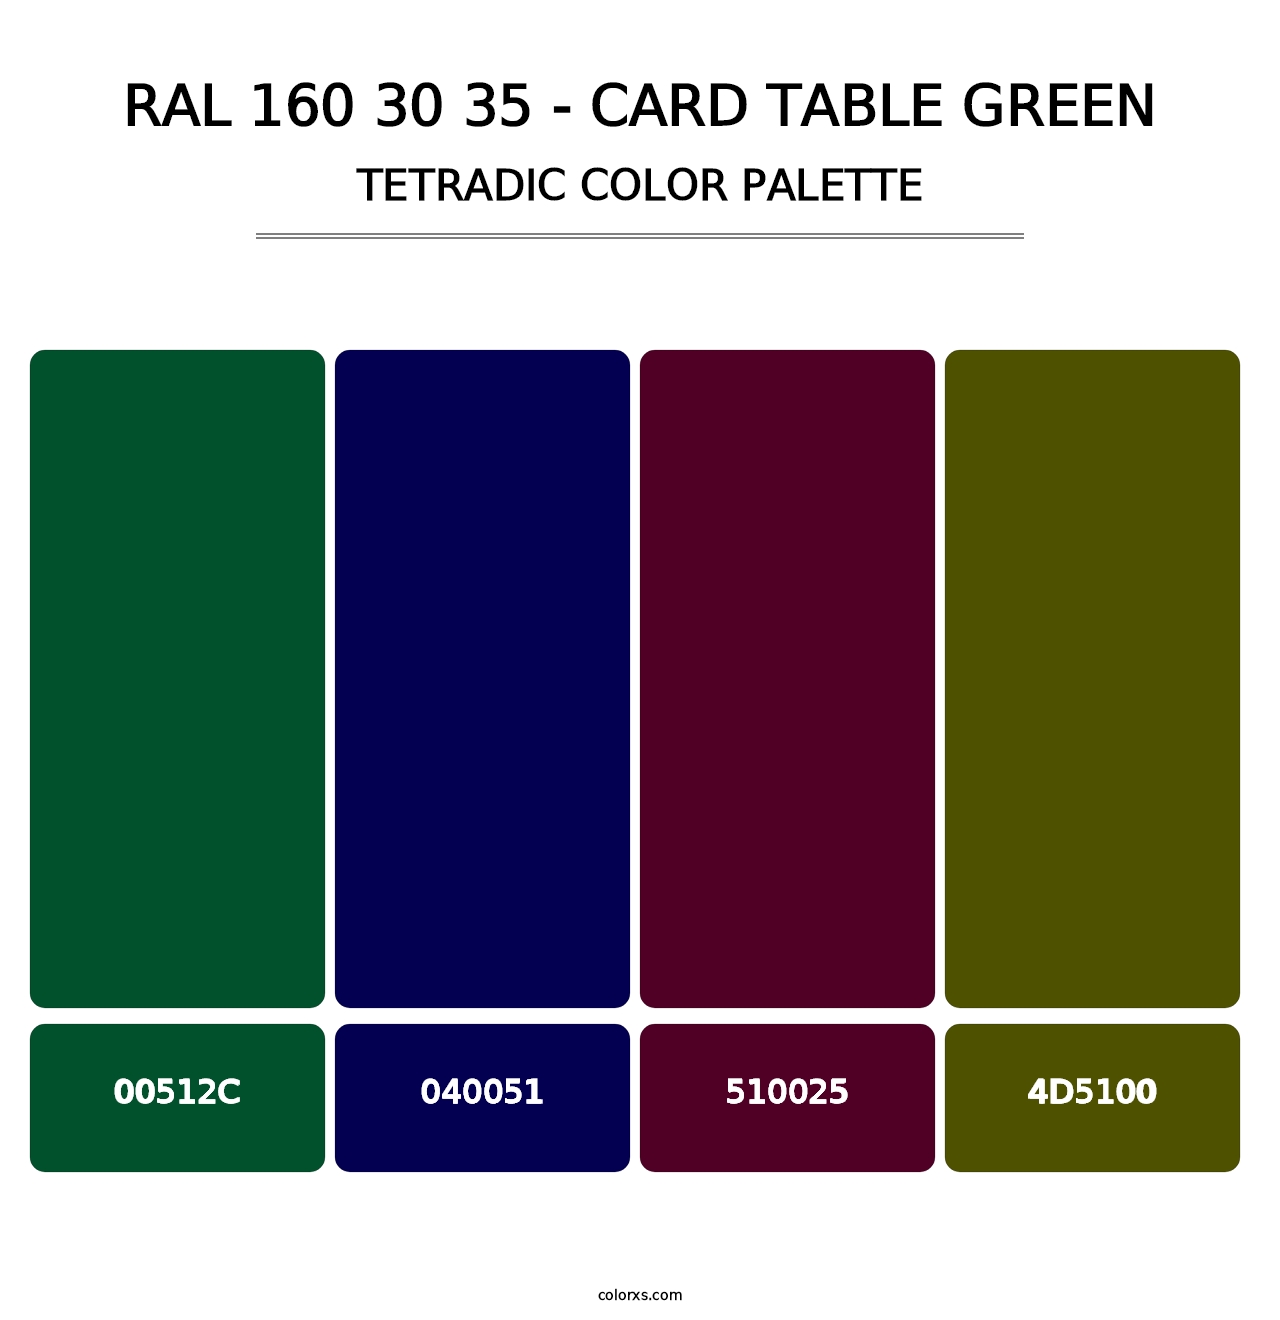 RAL 160 30 35 - Card Table Green - Tetradic Color Palette